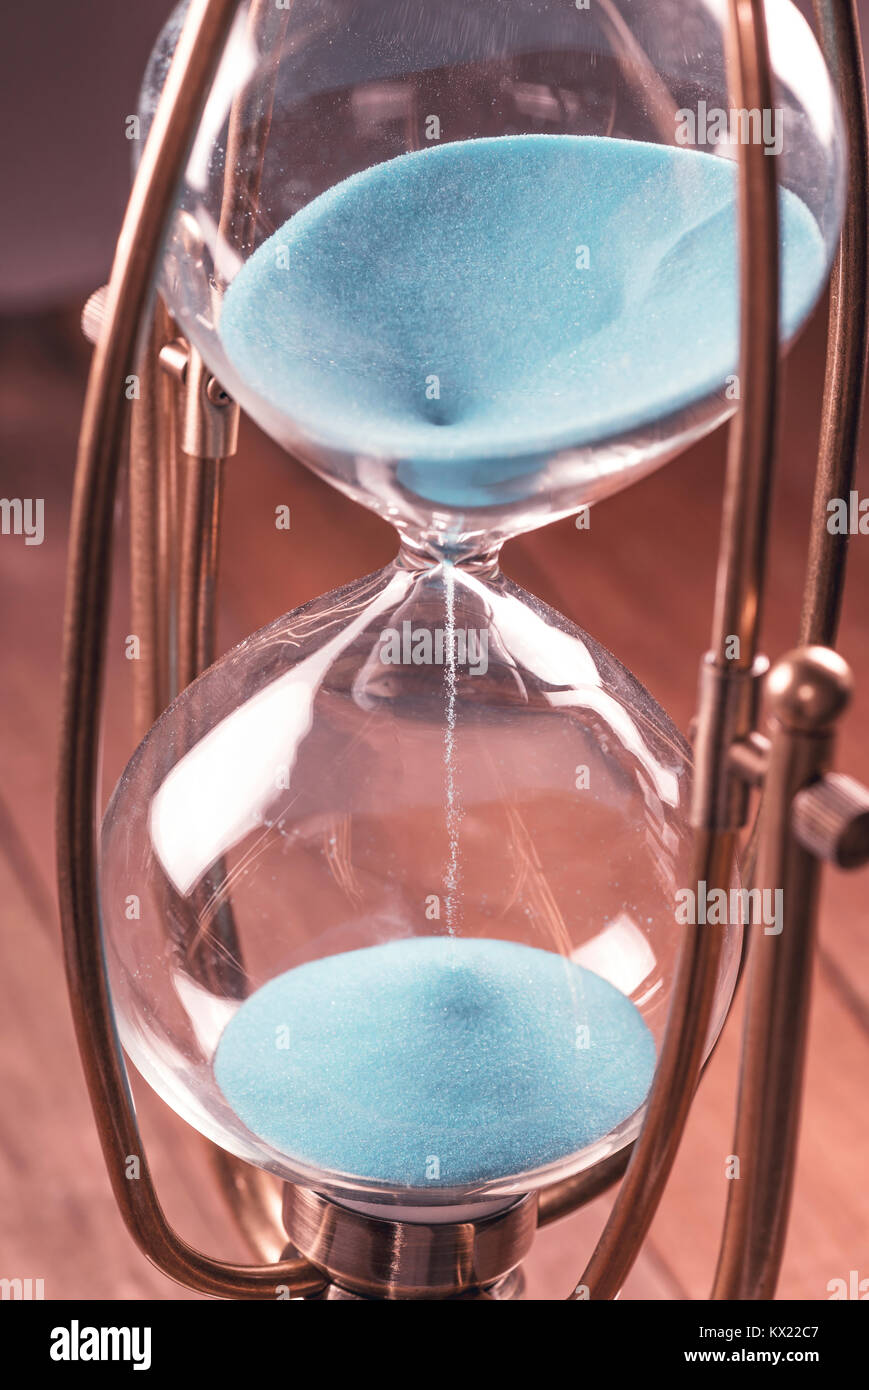 Hourglass with sand. Stock Photo